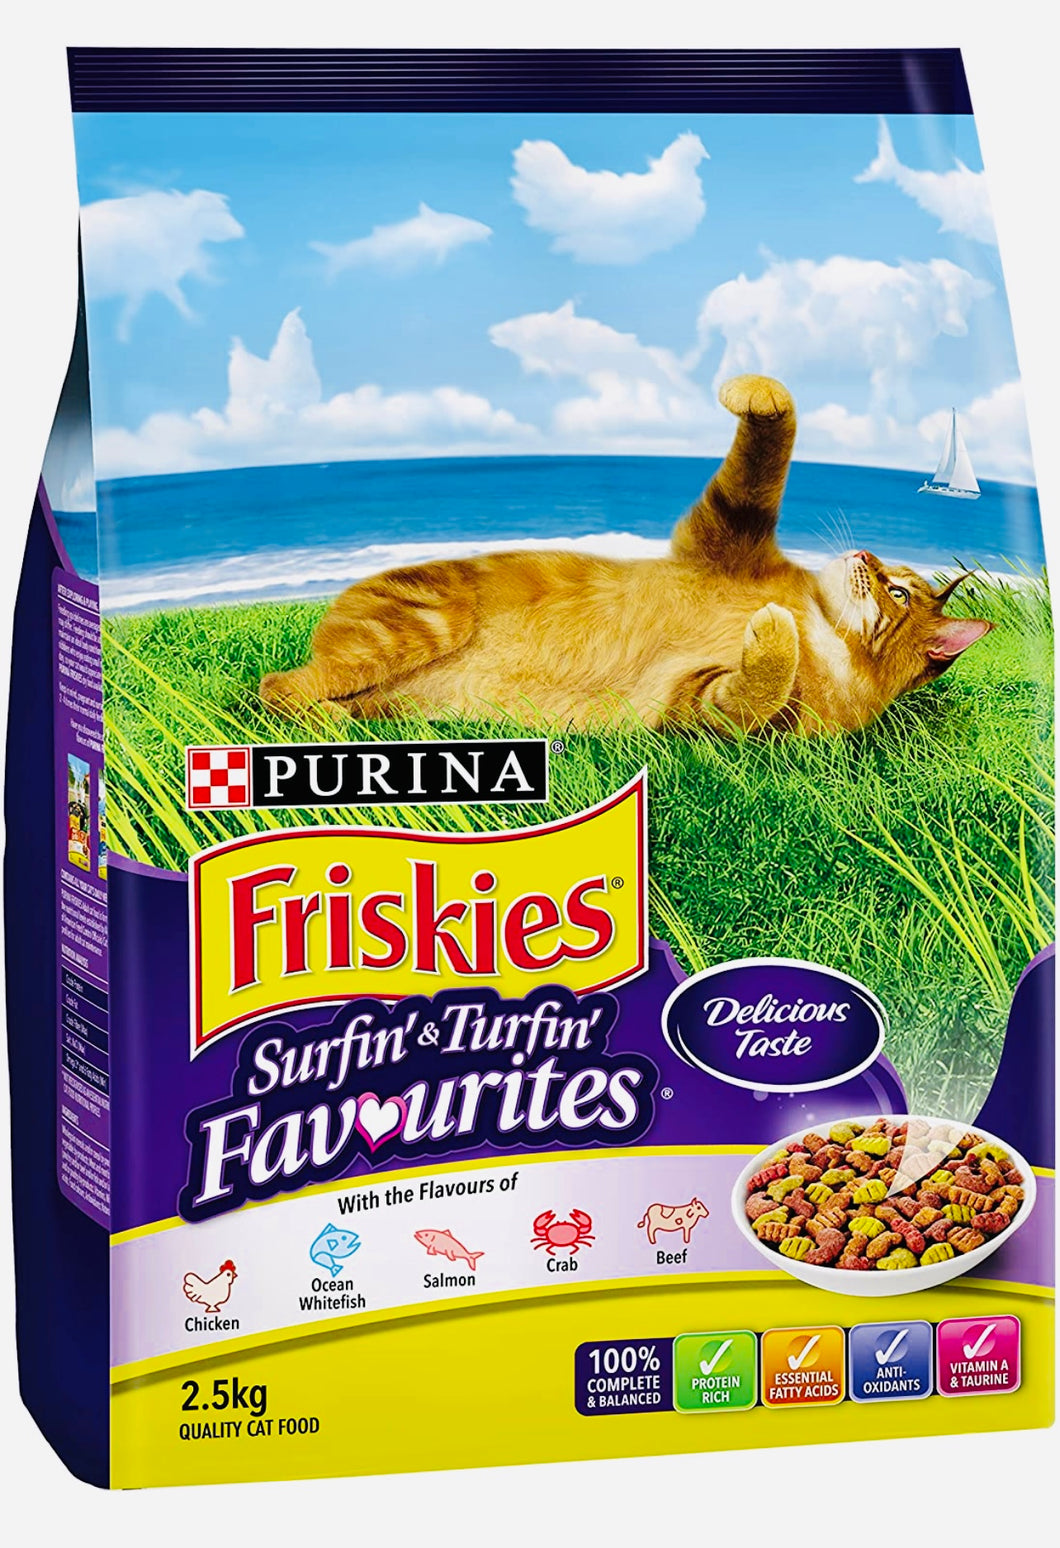 Purina Friskies Surfin And Turfin Favourites for Senior & adult 2.5kg